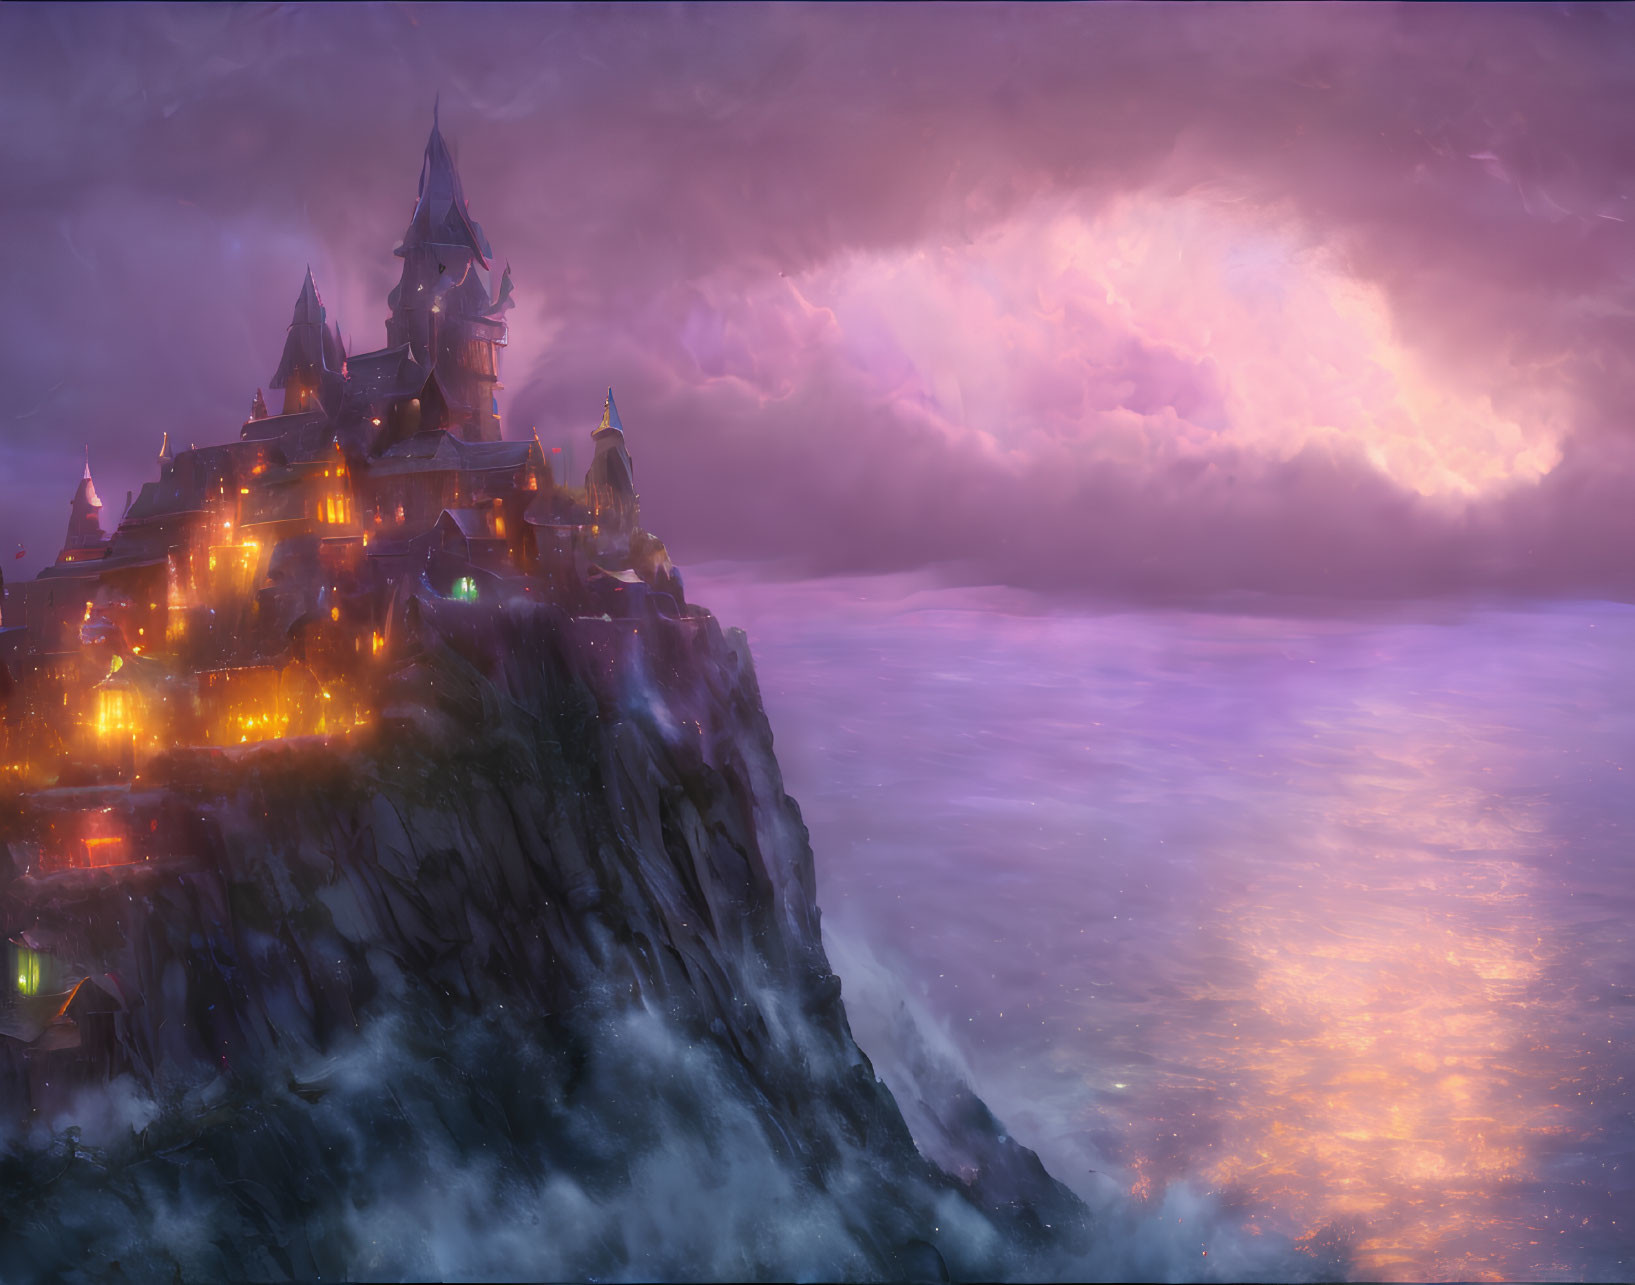 Illuminated castle on cliff above sea under purple and pink sky